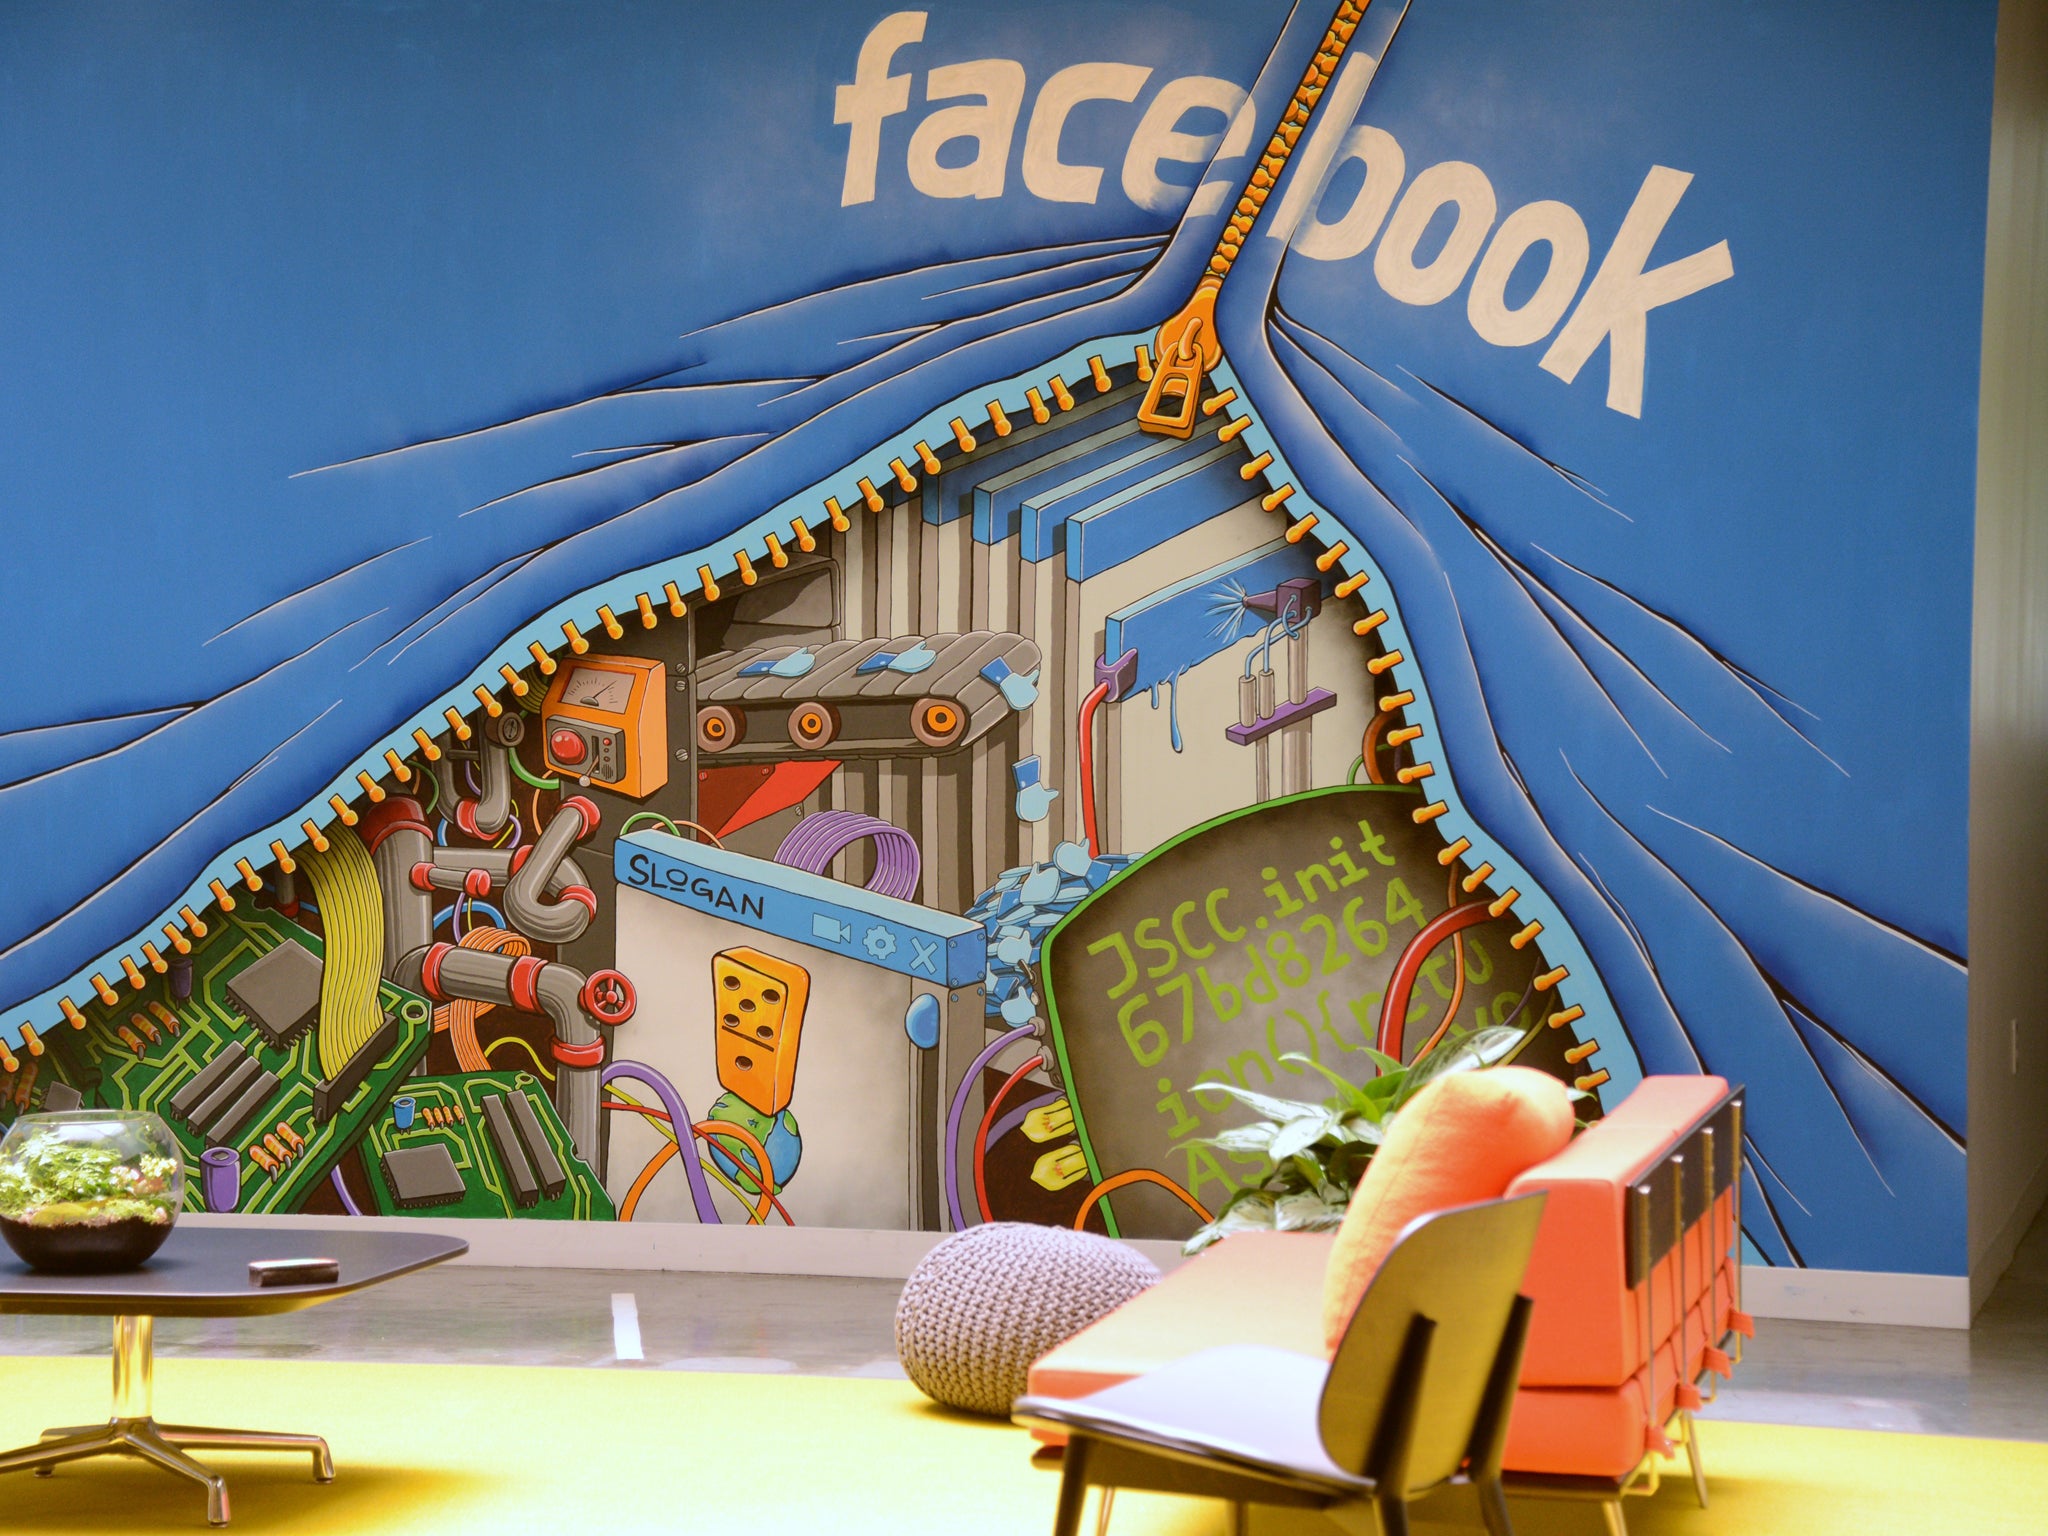 'T.N.R. 250', short for 'The Nouveau Riche 250', comprises Facebook's first 250 employees